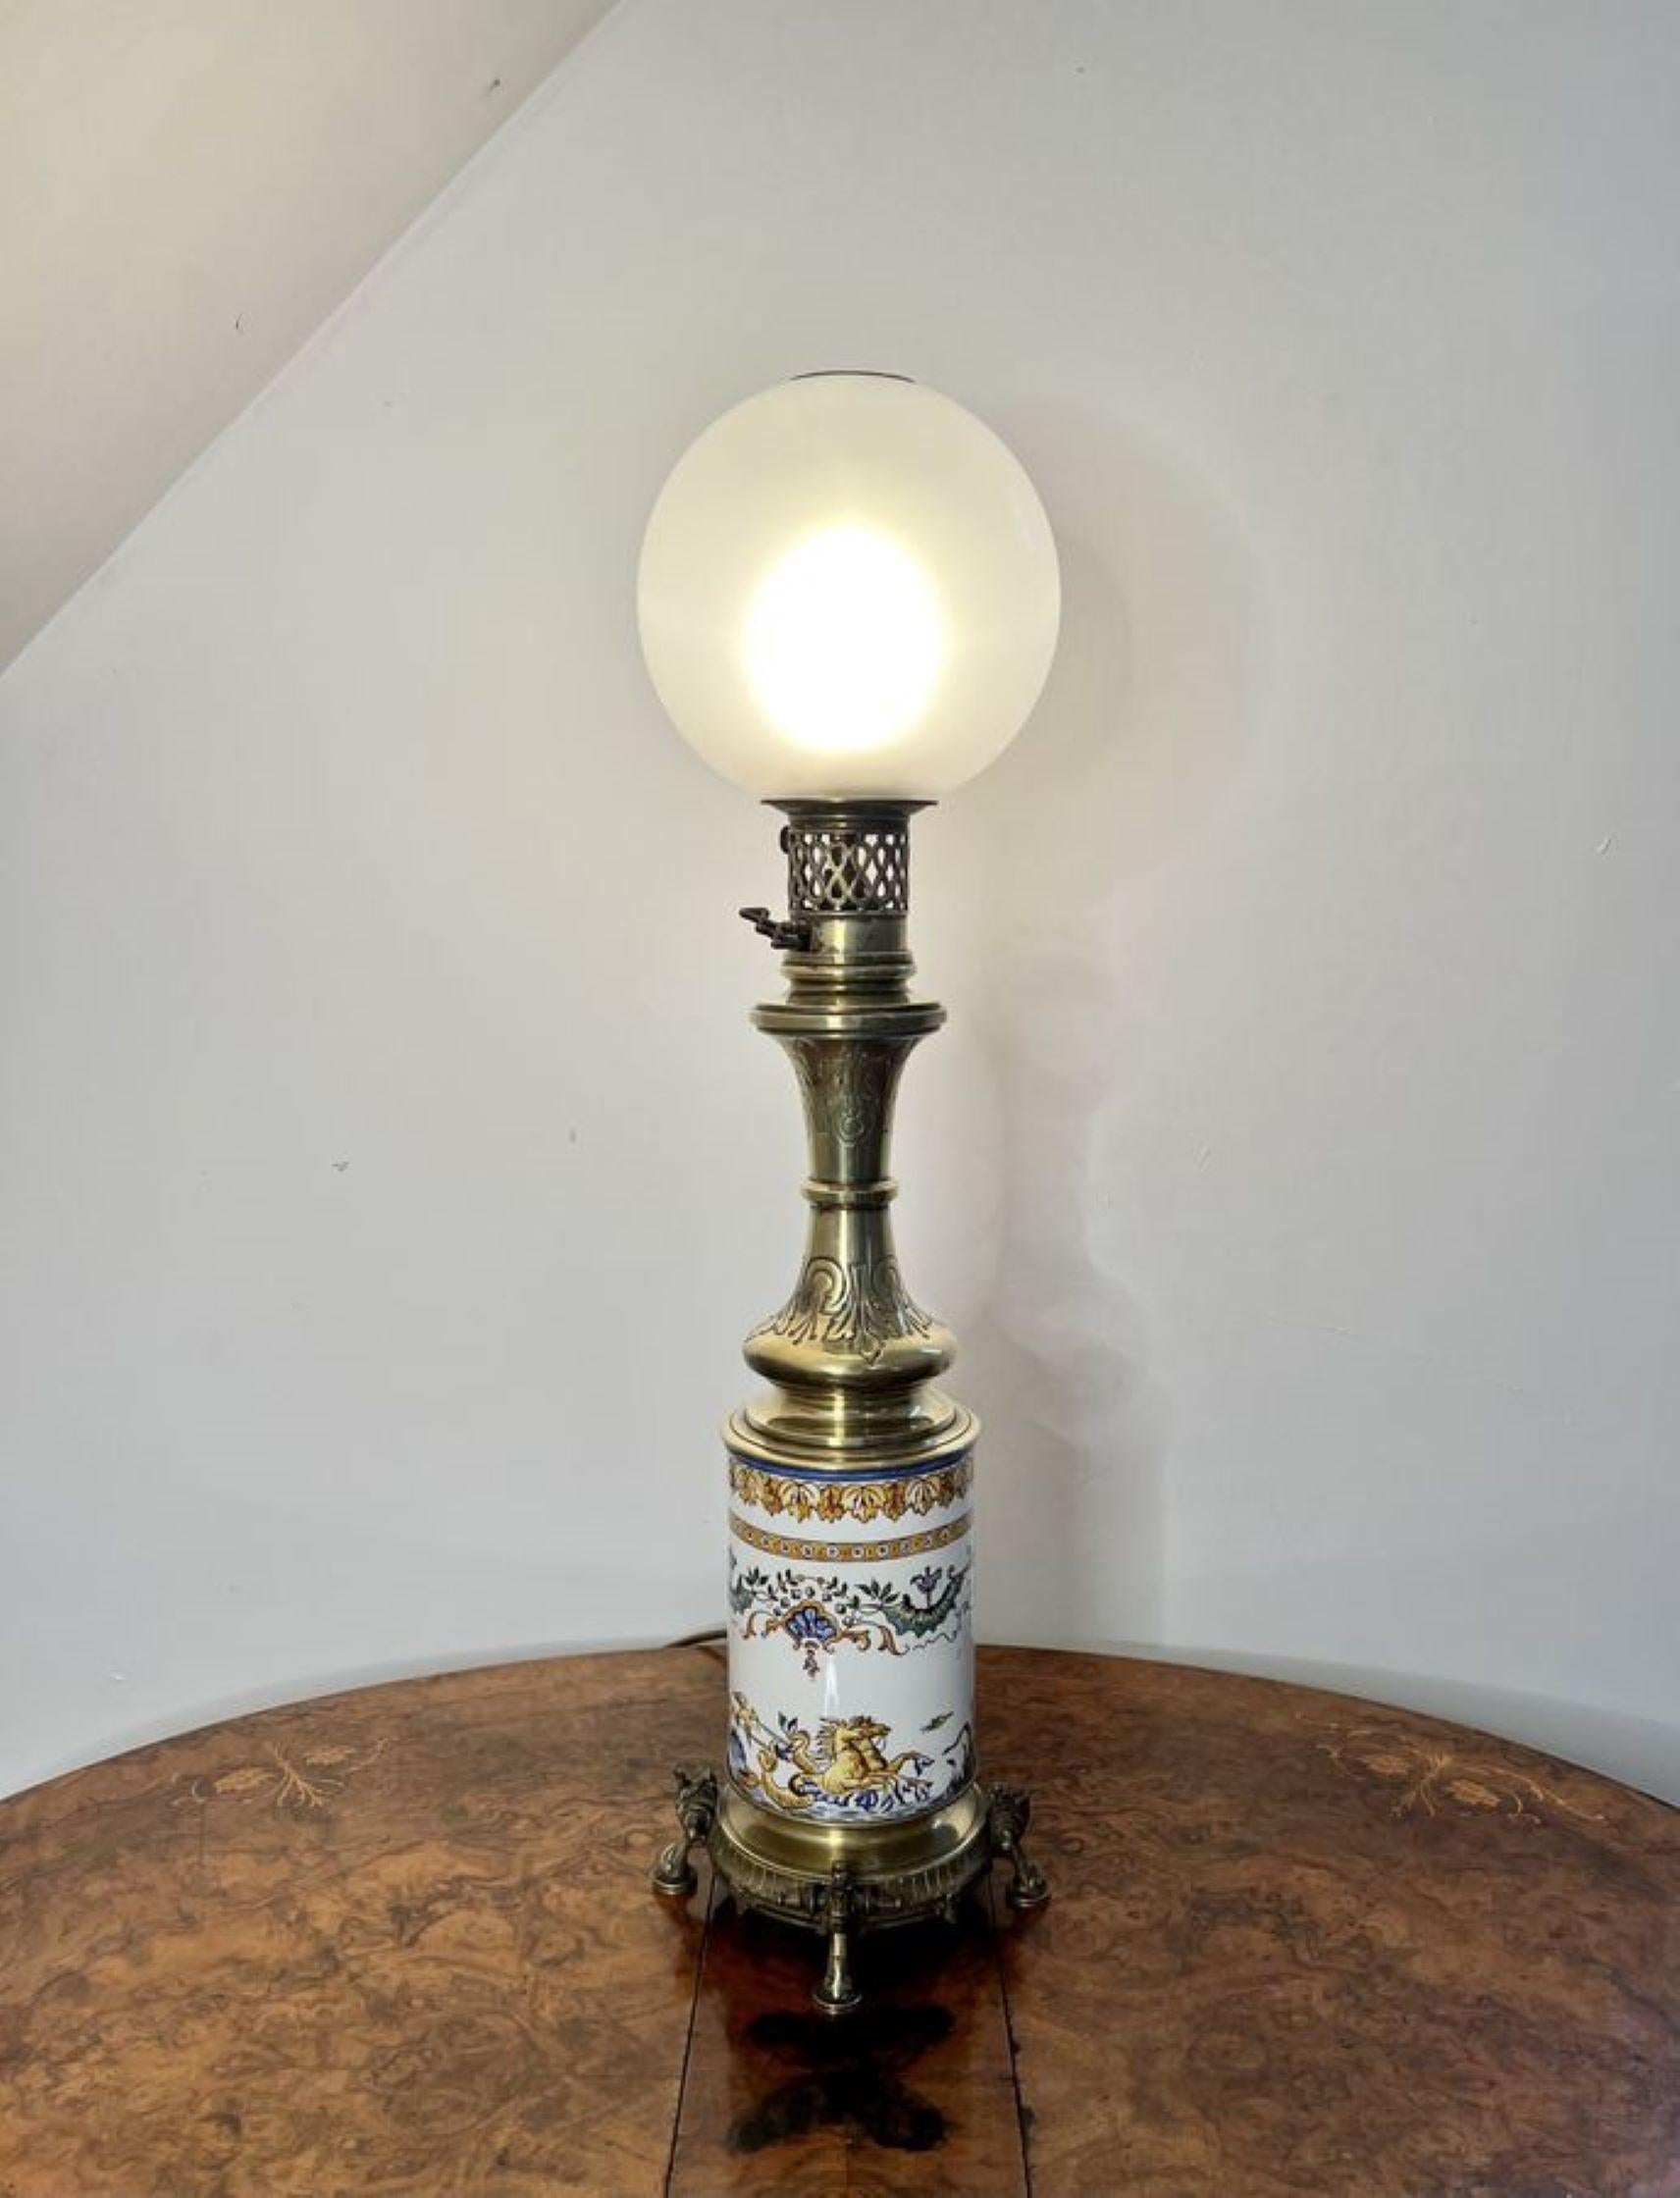 Quality antique Victorian ceramic and brass lamp, having a fantastic ceramic base decorated with sea creatures, birds, scrolls and leaves on a white ground hand painted in blue, yellow, green and brown colours, raised on four brass ornate feet, a